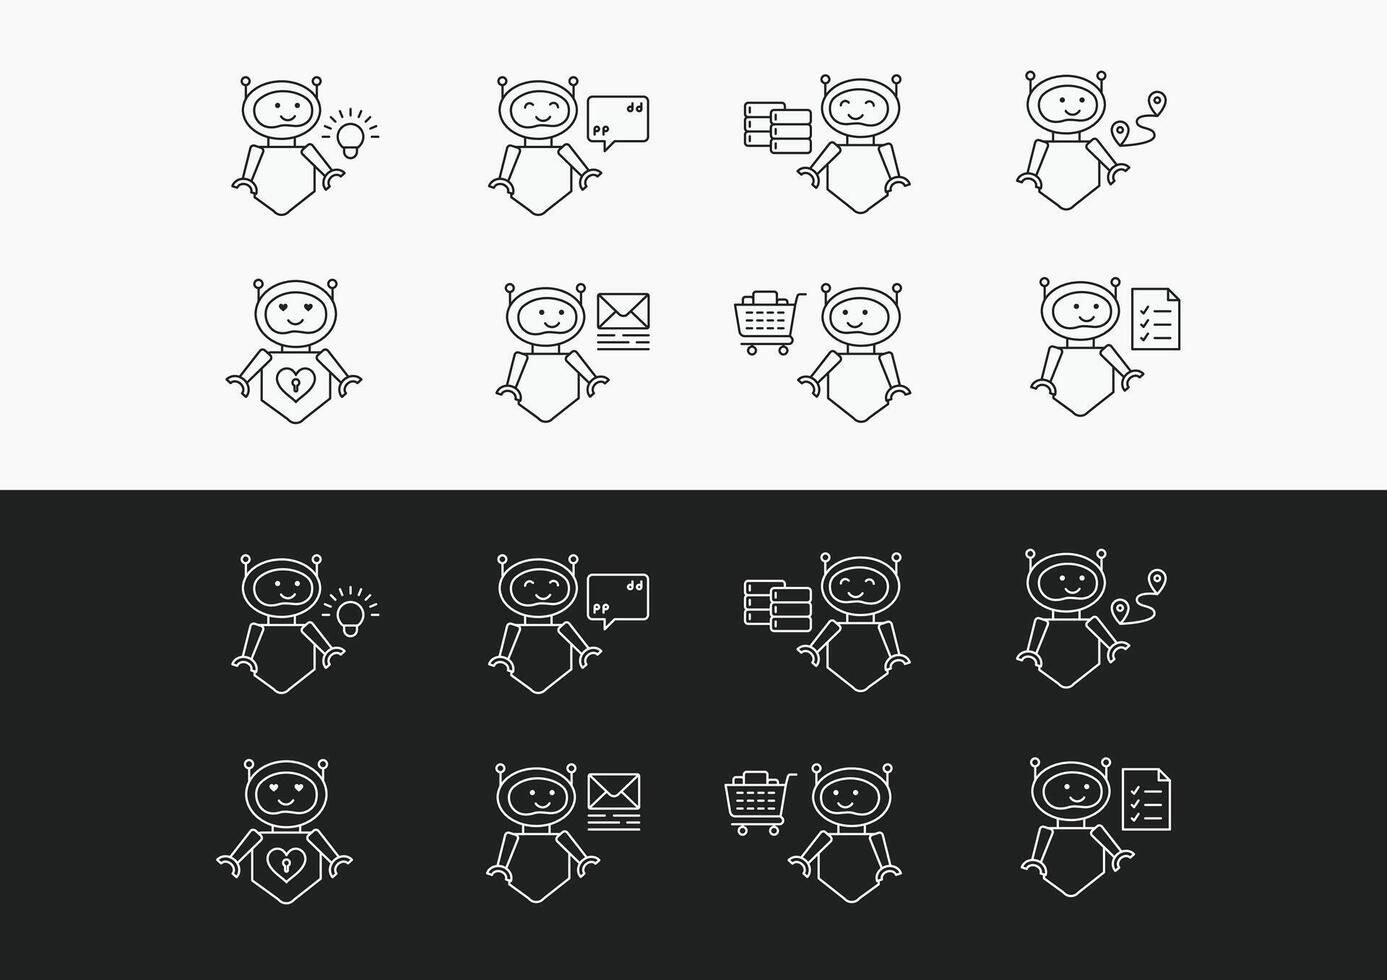 Innovative AI Robot Icons for Creative Projects. AI Robot Illustration Pack for Artificial Intelligence, Chat, GPT, and Automation Technology. Vector Icons.